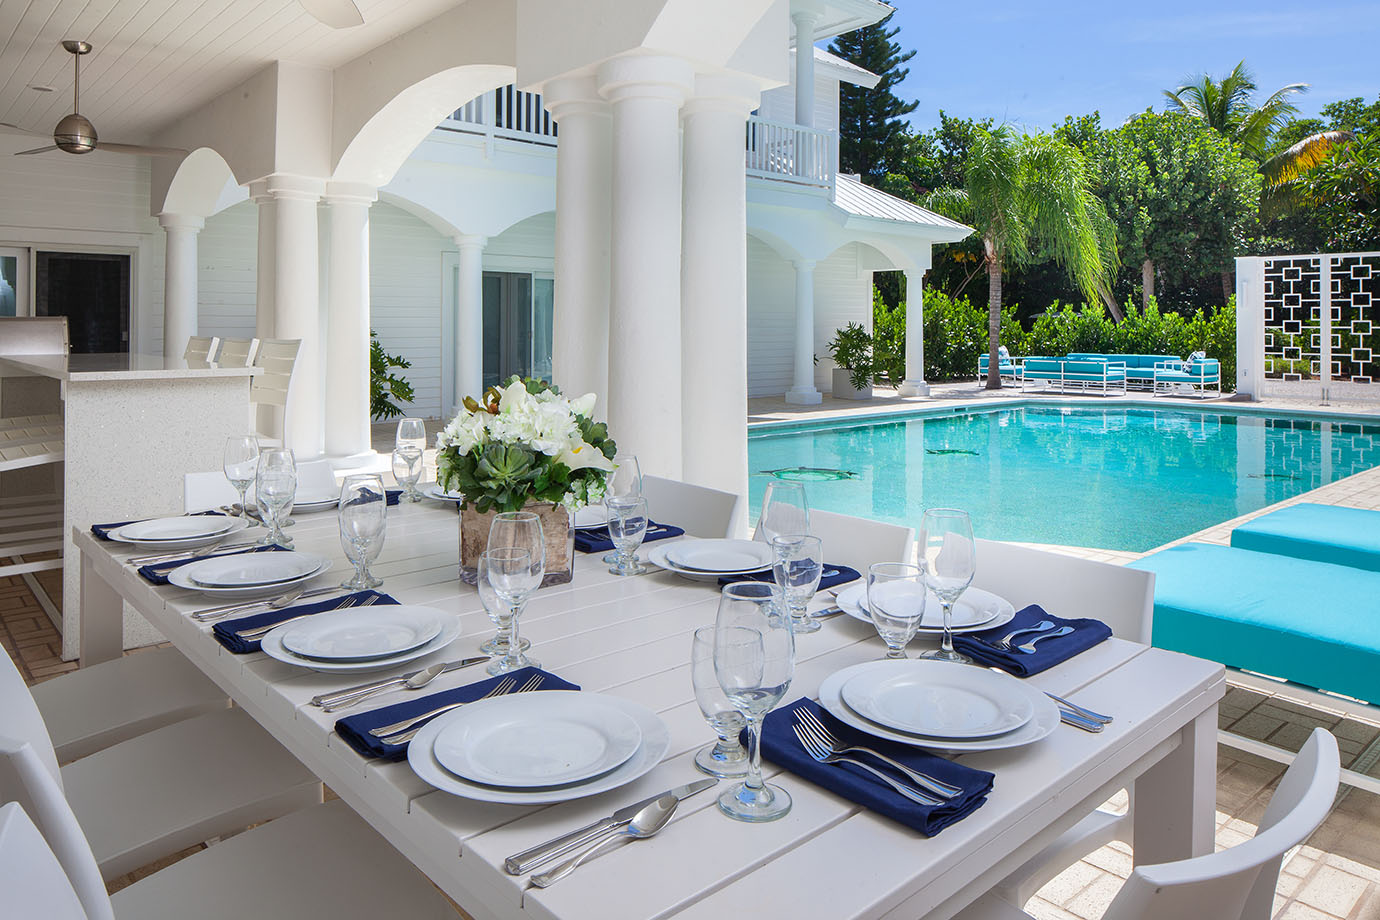 White tables and chairs with dining set and flowers near pool with patio furniture at the Sea Oats Estate in Captiva Island, FL